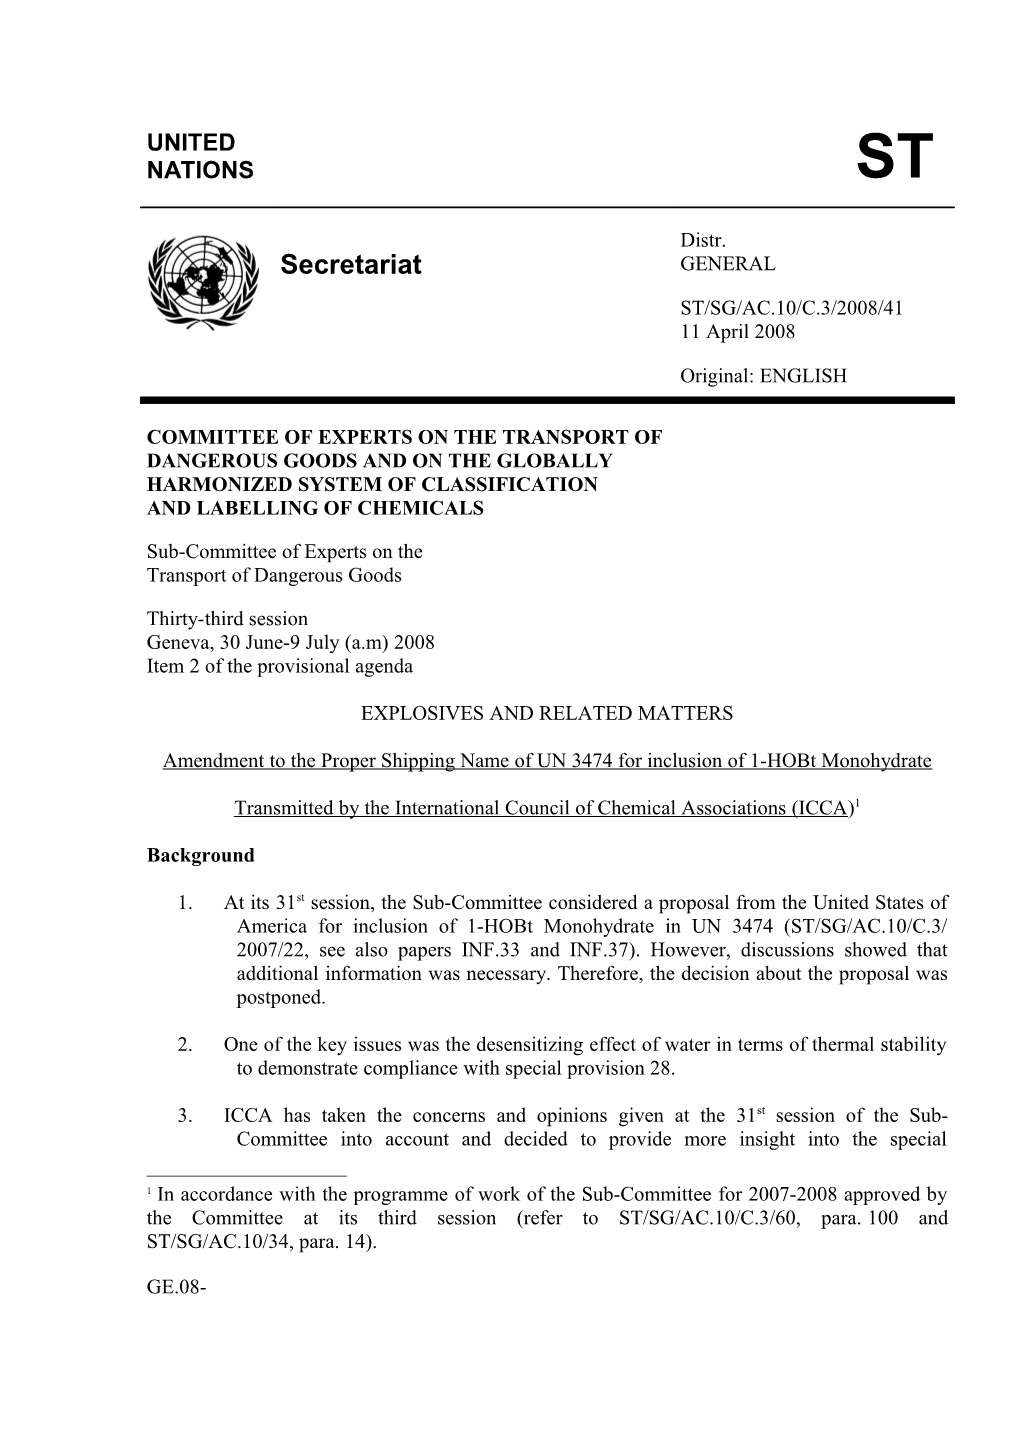 Amendment to UN 3474 for Inclusion of 1-Hobt Monohydrate